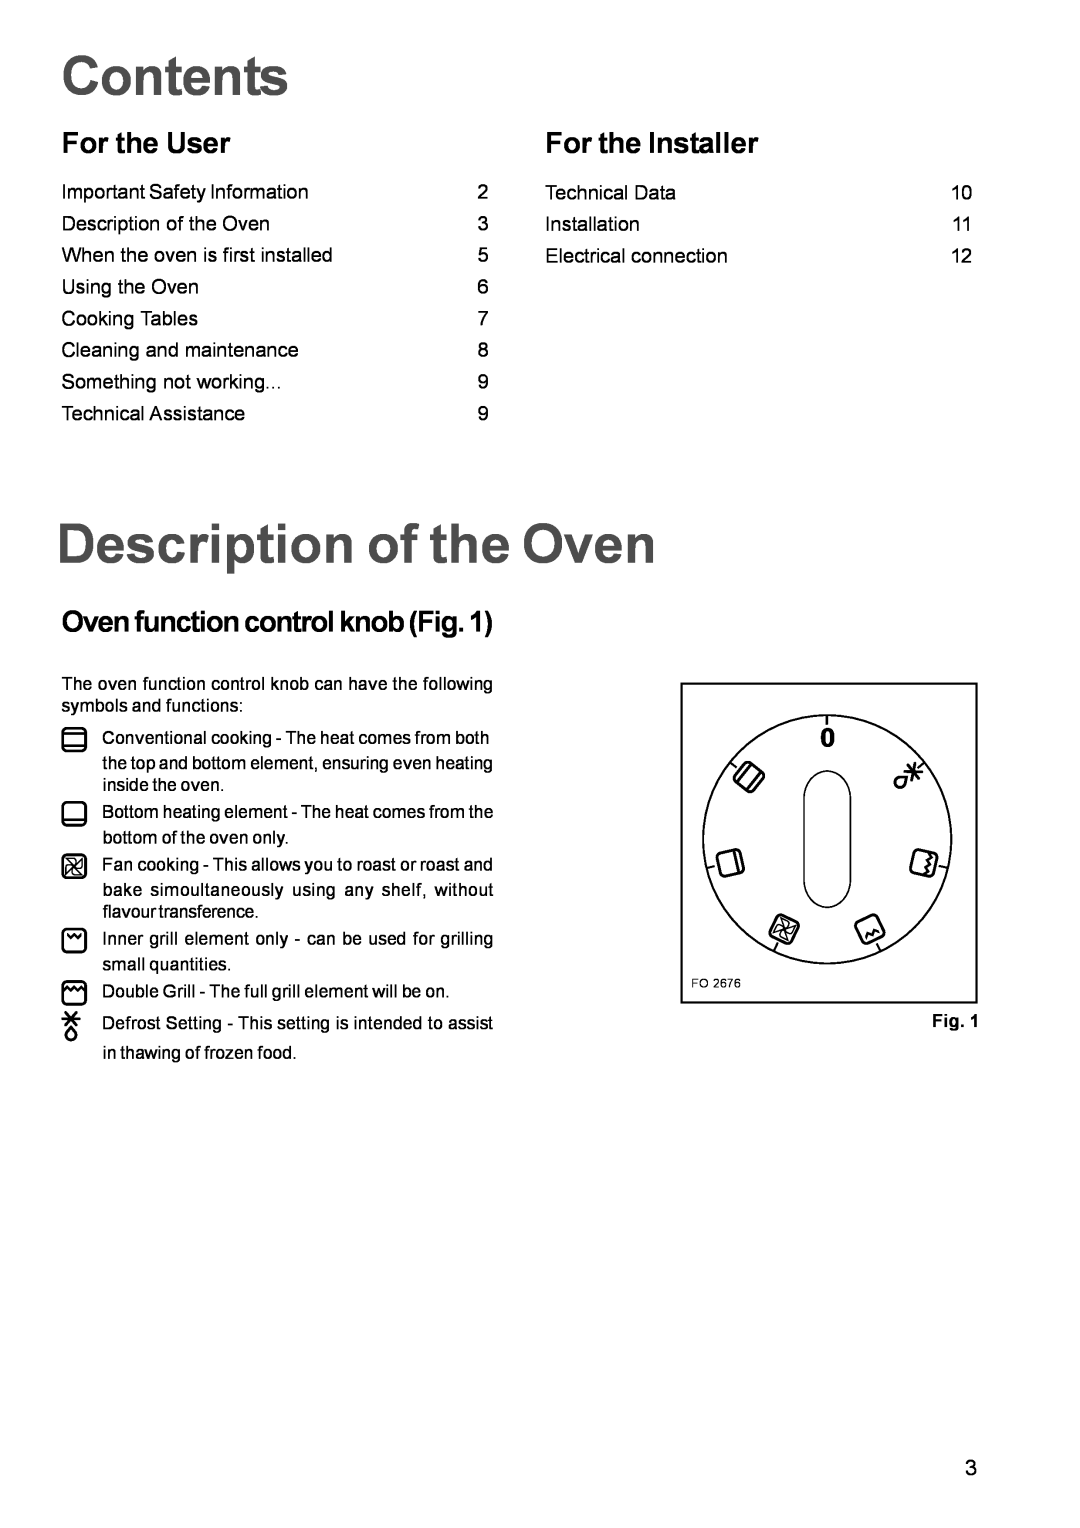 Zanussi ZBF 610 manual Contents, Description of the Oven, For the User, For the Installer, Oven function control knob Fig 